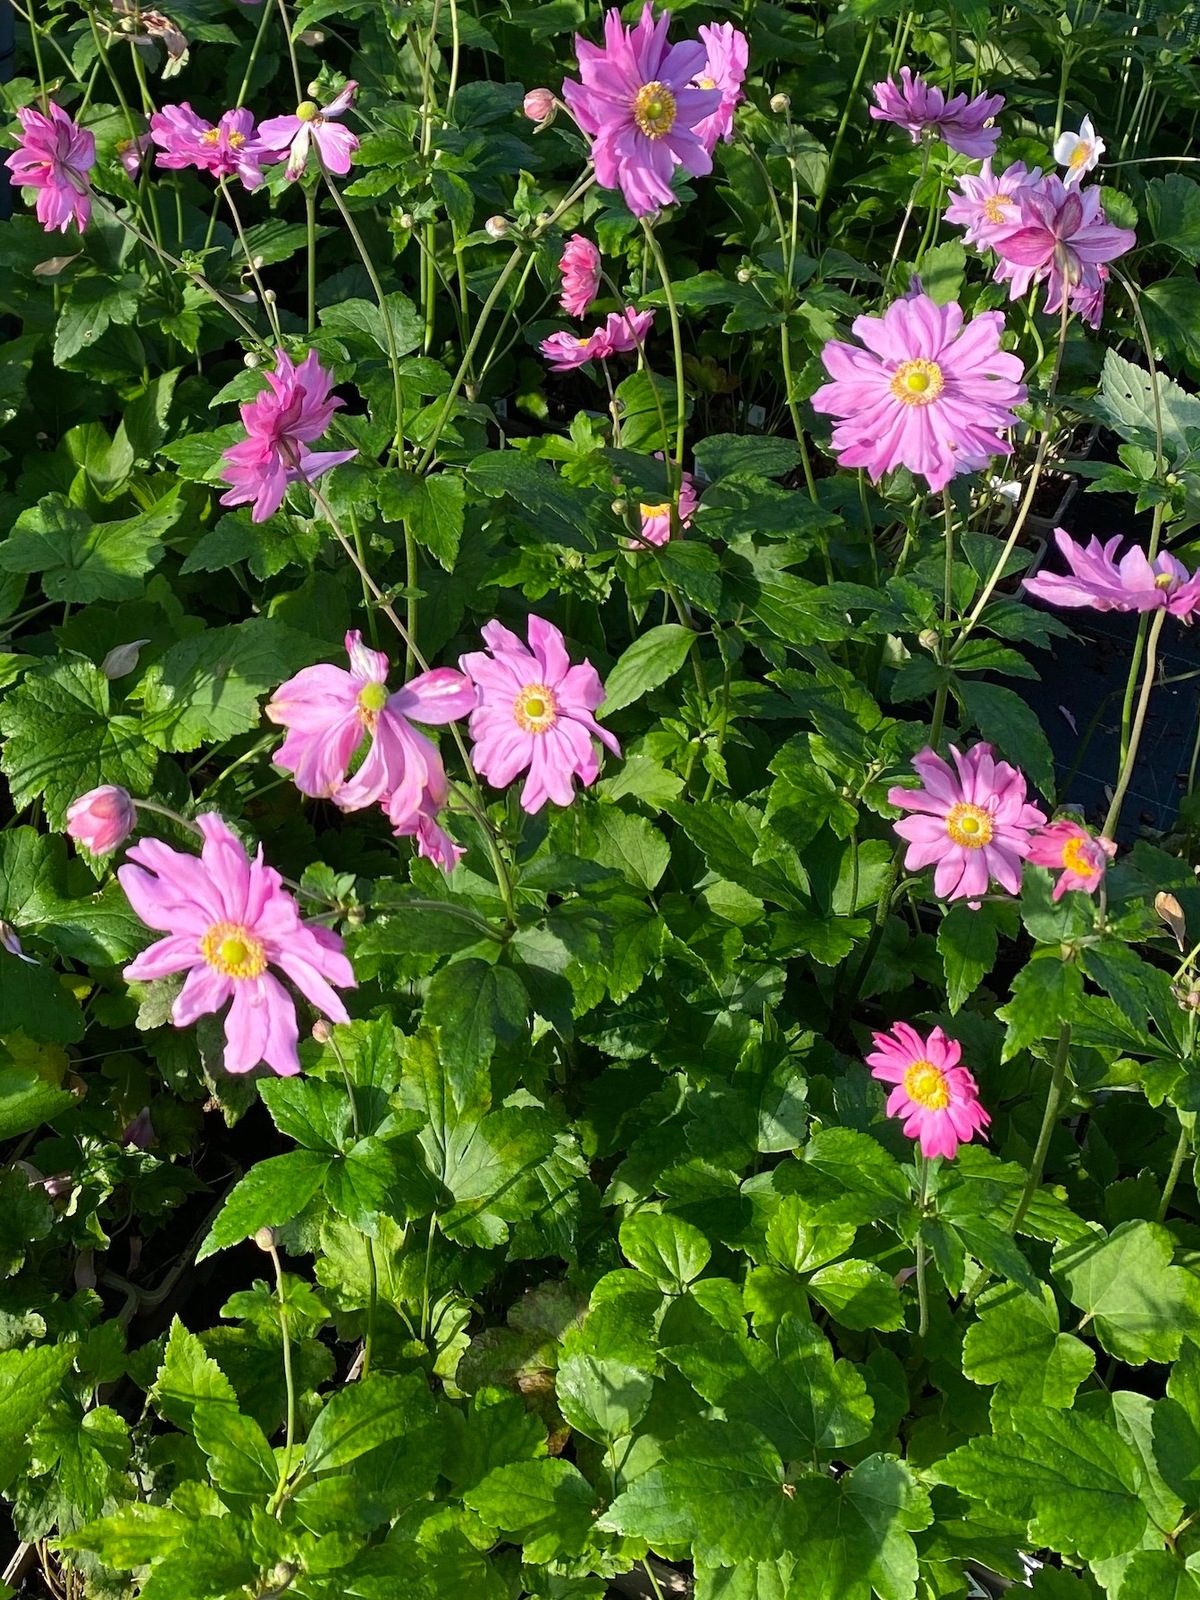 Anemone var. japonica 'Pamina' - The Beth Chatto Gardens